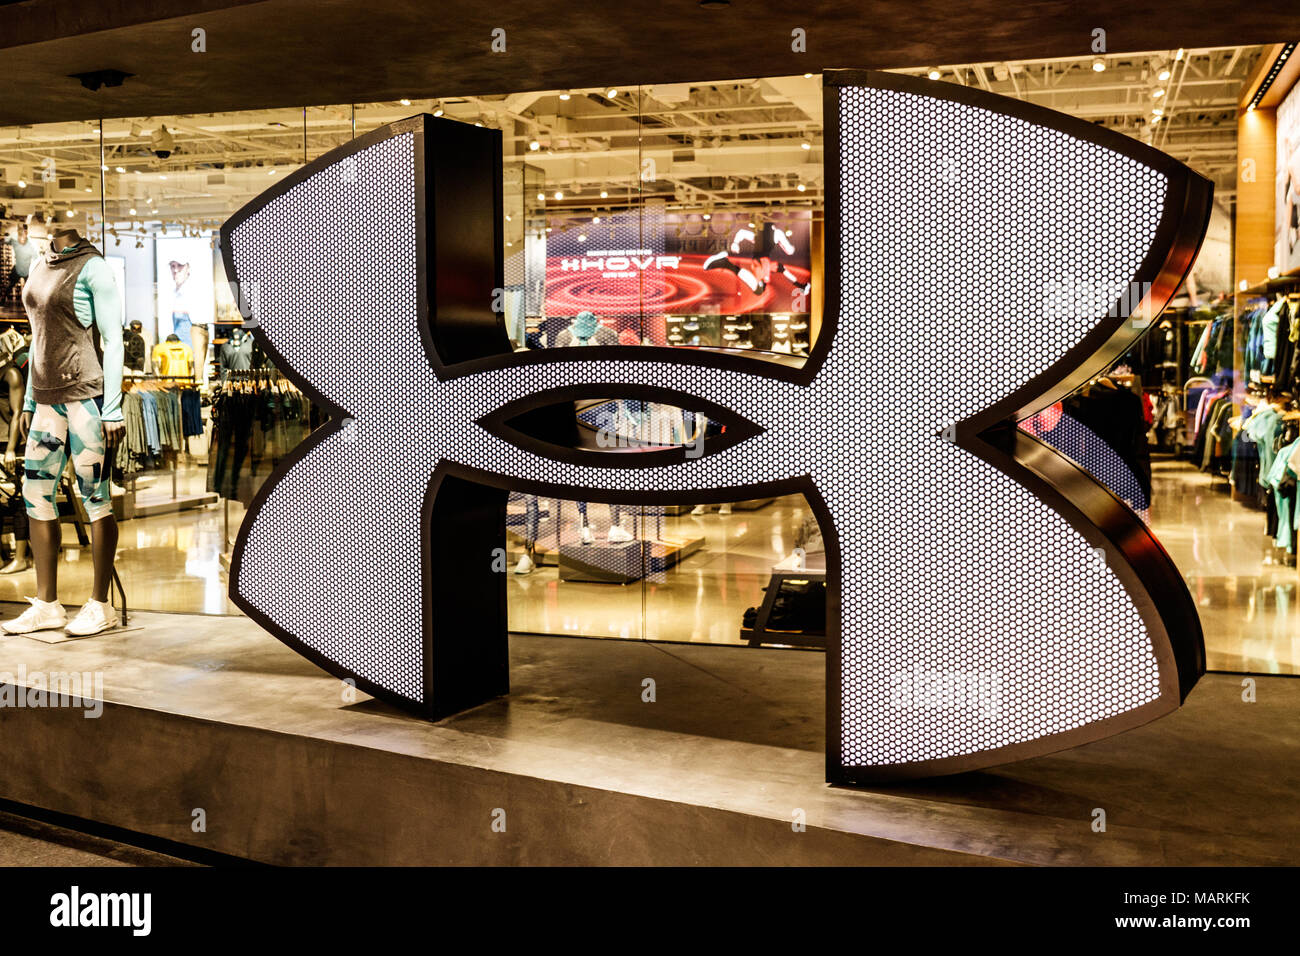 Indianapolis - April 2018: Under Armour mall location. Under Armour manufactures a popular line sporting equipment apparel I Photo - Alamy